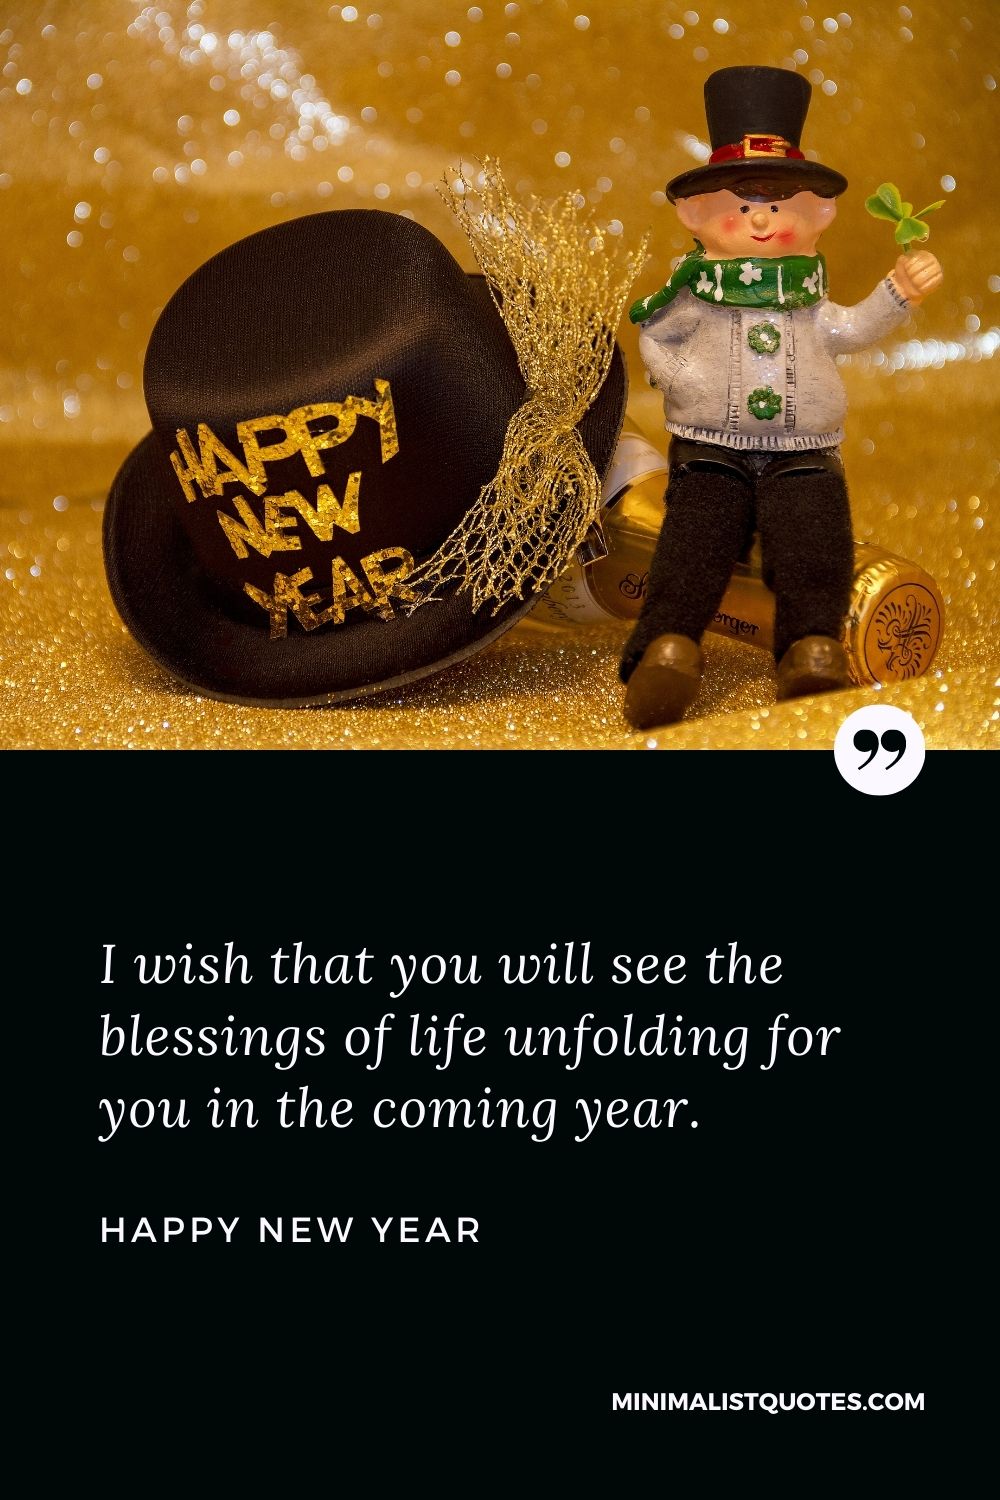 New Year Wish - I wish that you will see the blessings of life unfolding for you in the coming year.